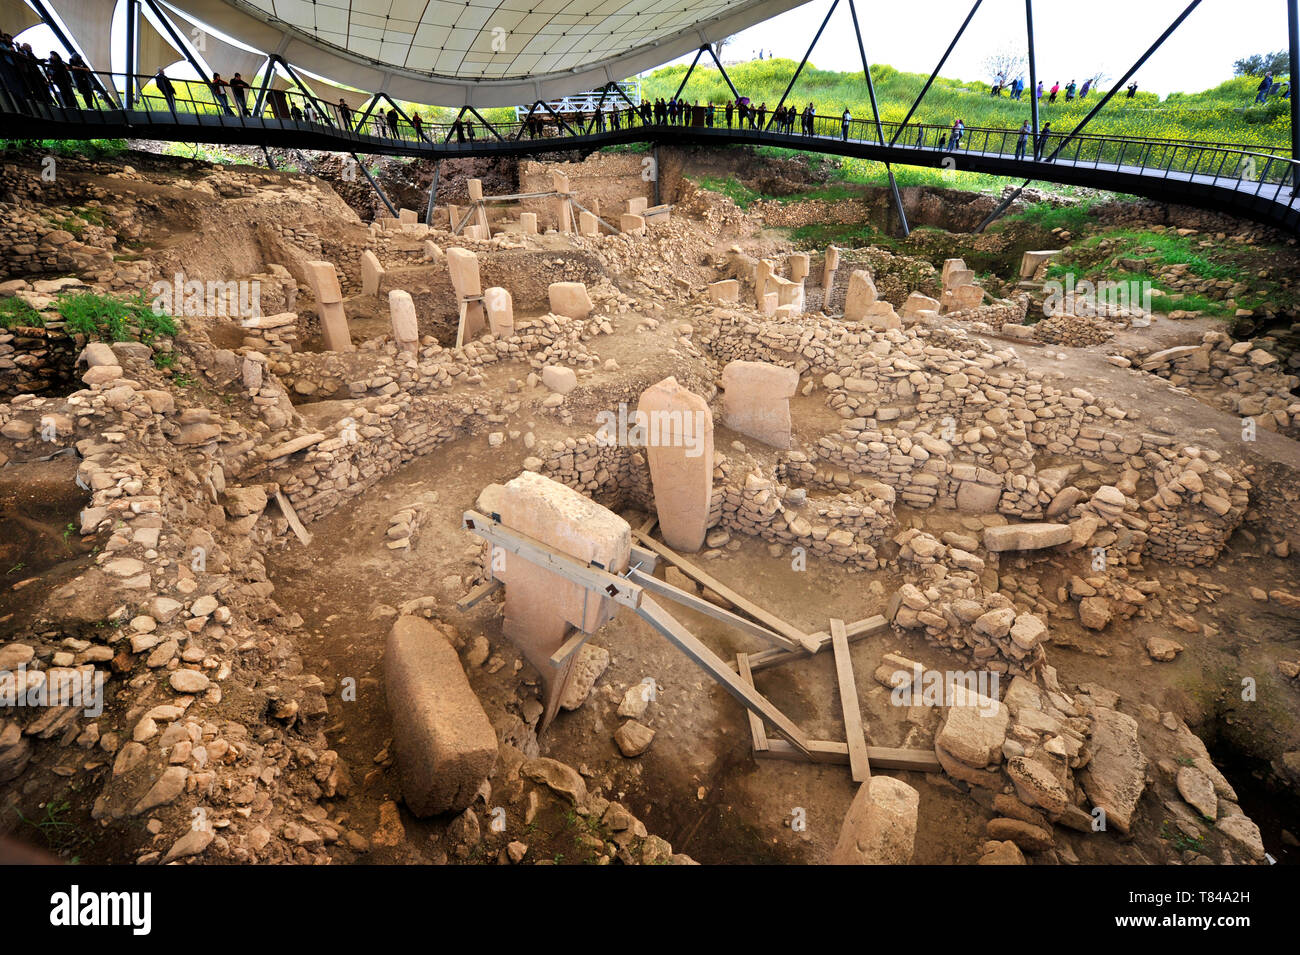 Visitors have view of excavation of ancient archaeological site at Gobekli Tepe in Sanliurfa, Turkey Stock Photo